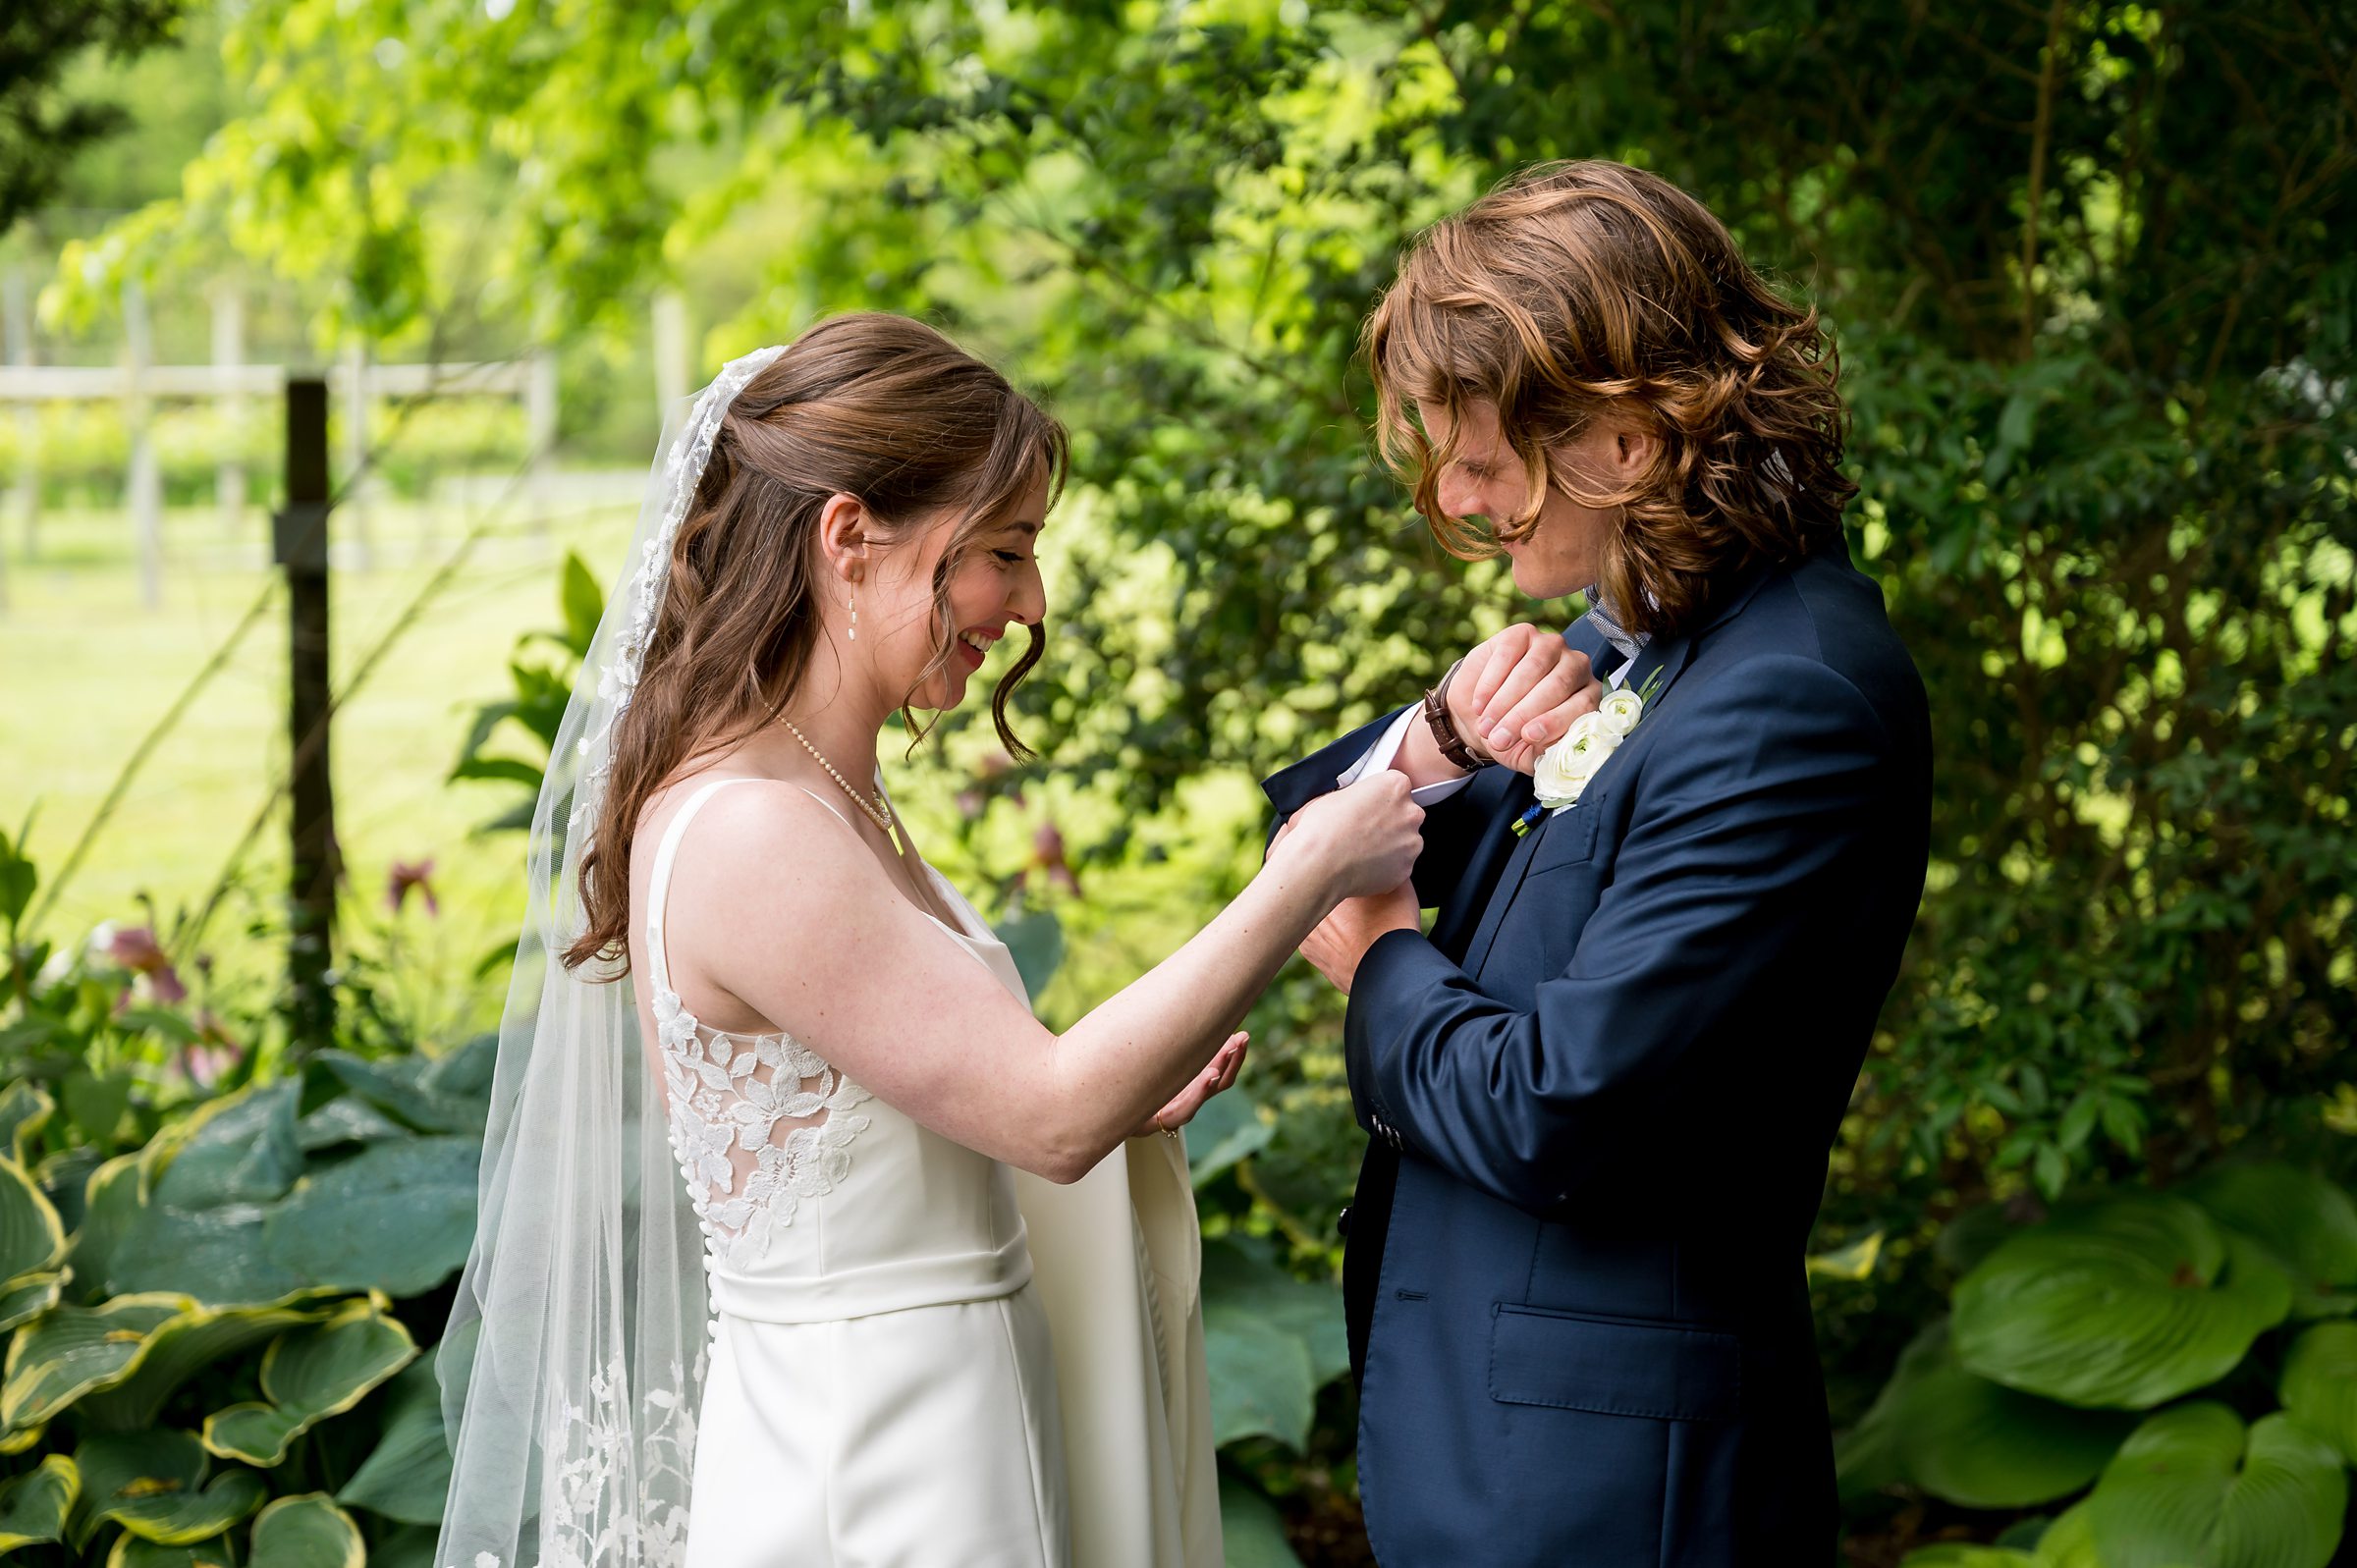 A bride adjusts the boutonniere on a groom's suit as they stand outdoors in a garden with lush greenery.